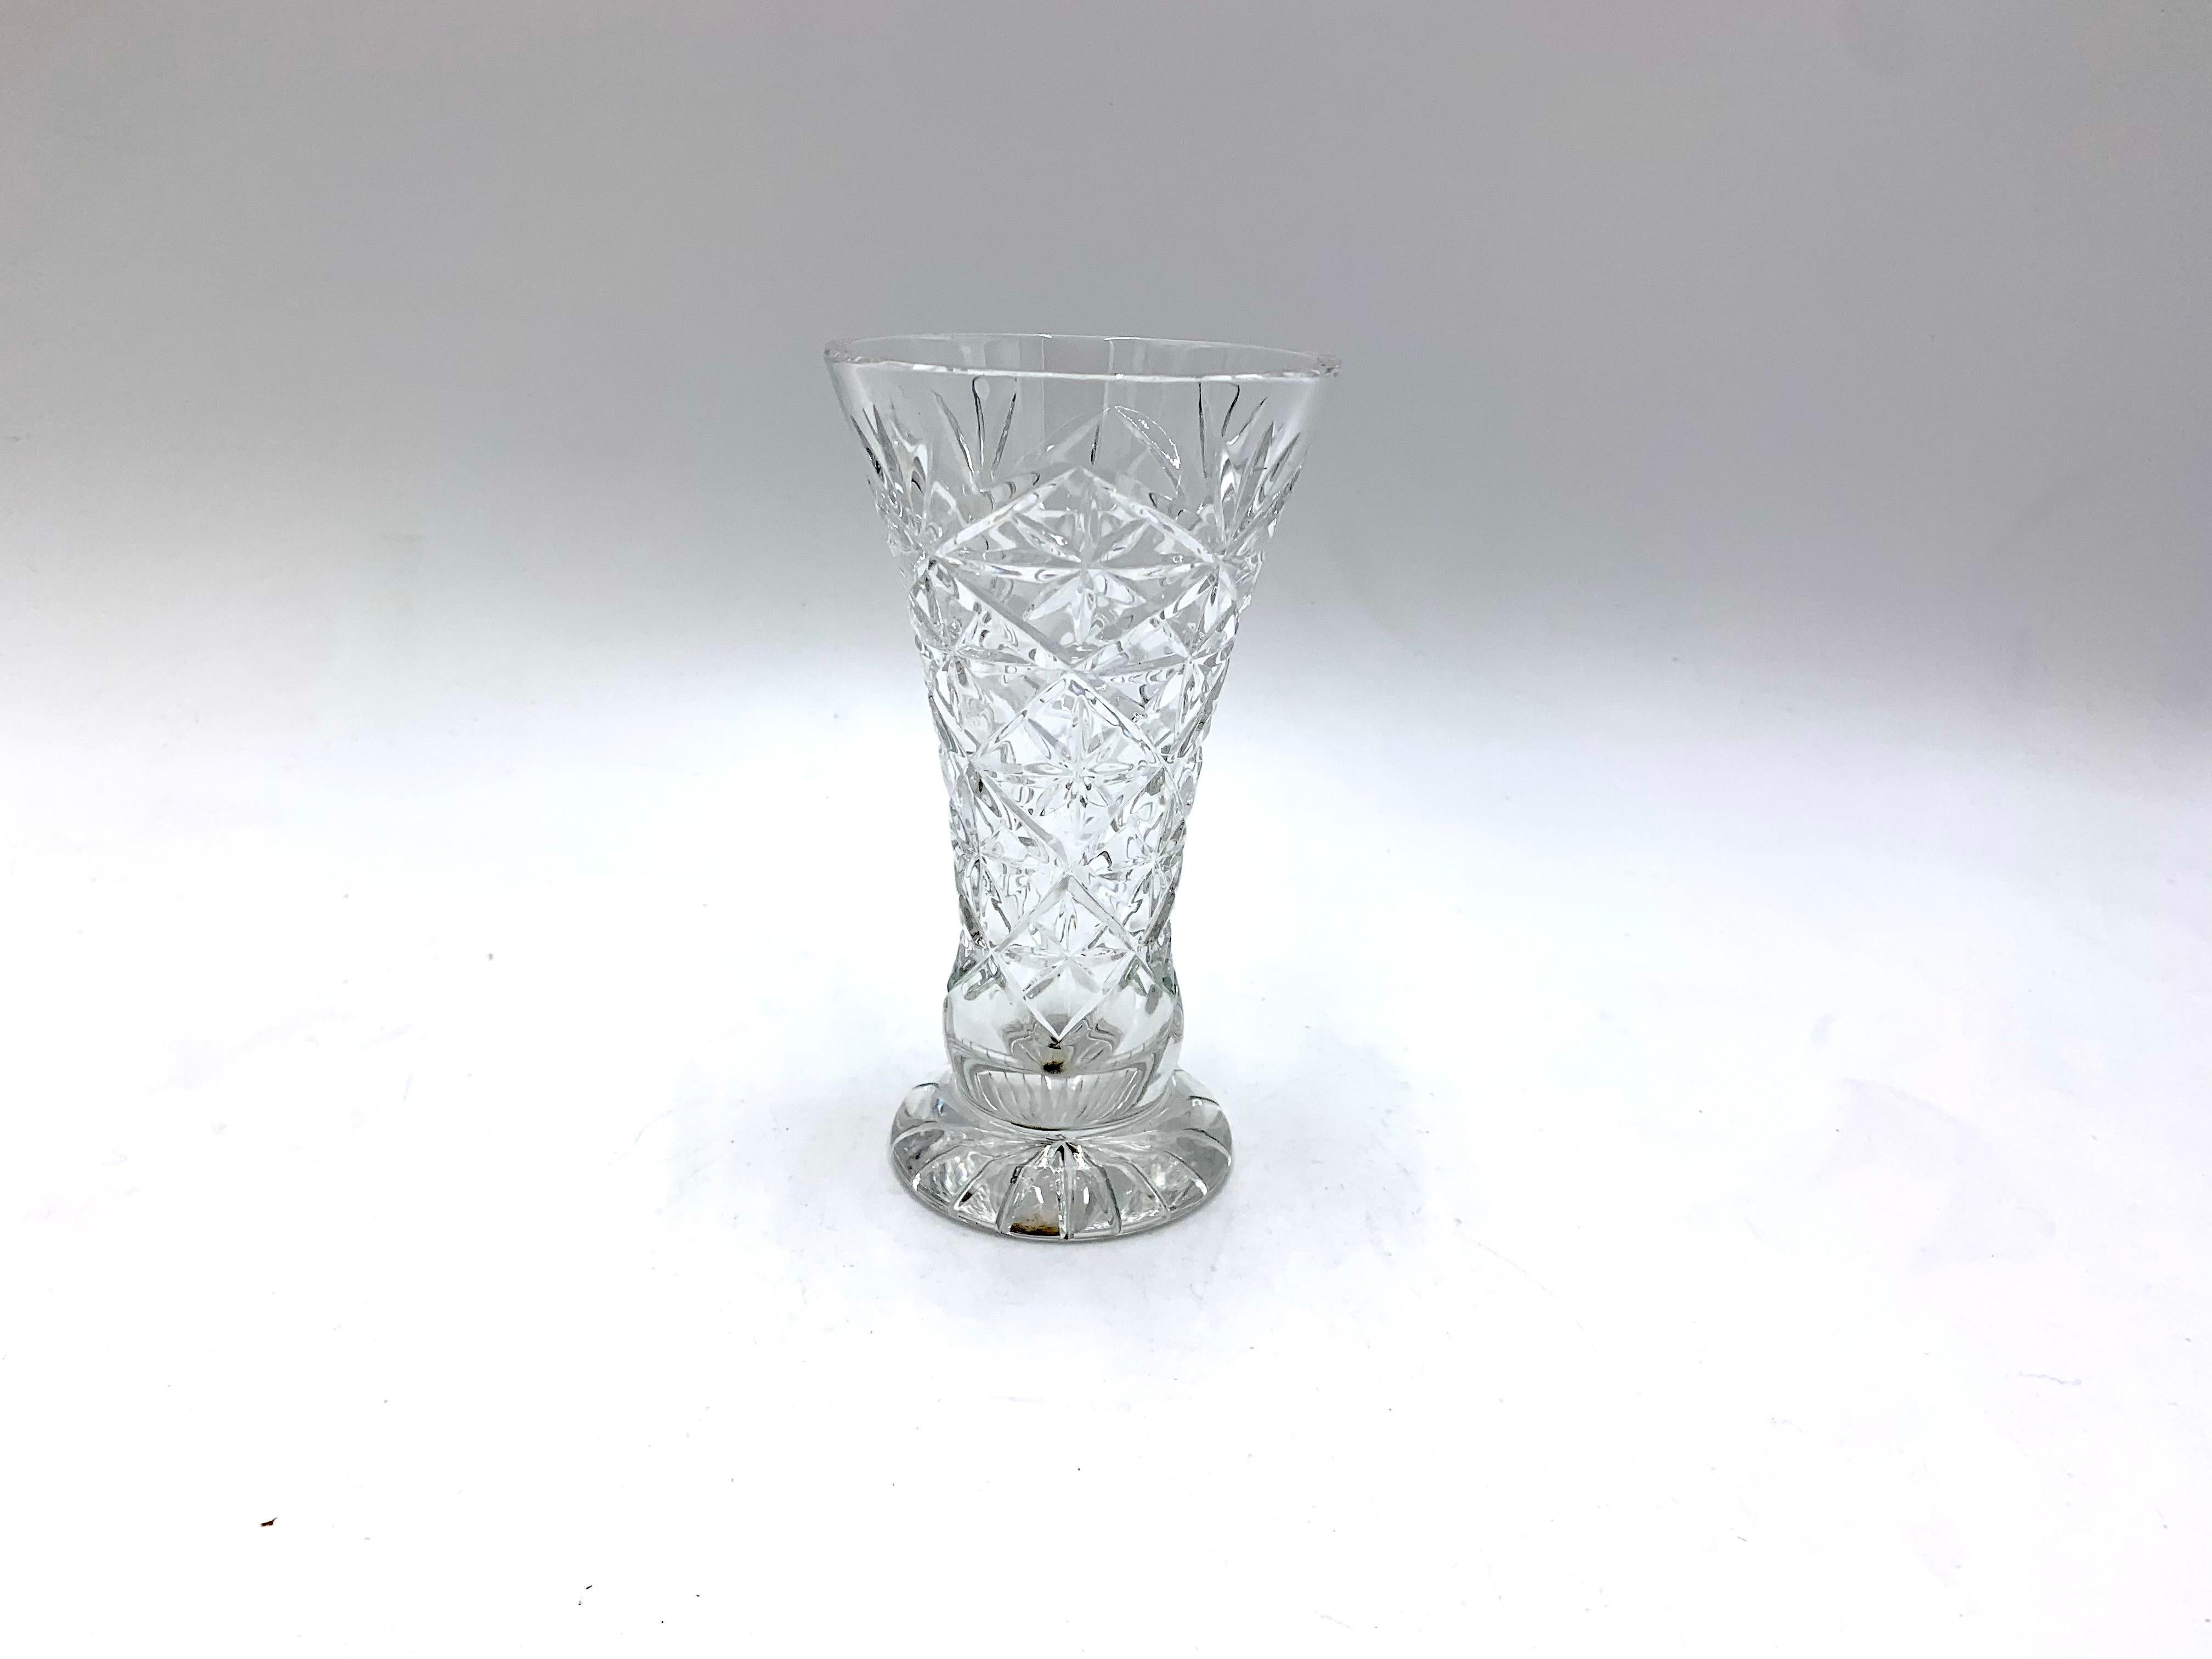 Vase made of crystal. The vase was produced in Poland in the 1960s and 1970s.
Vase in very good condition
Measures: height 15 cm / diameter 8 cm.